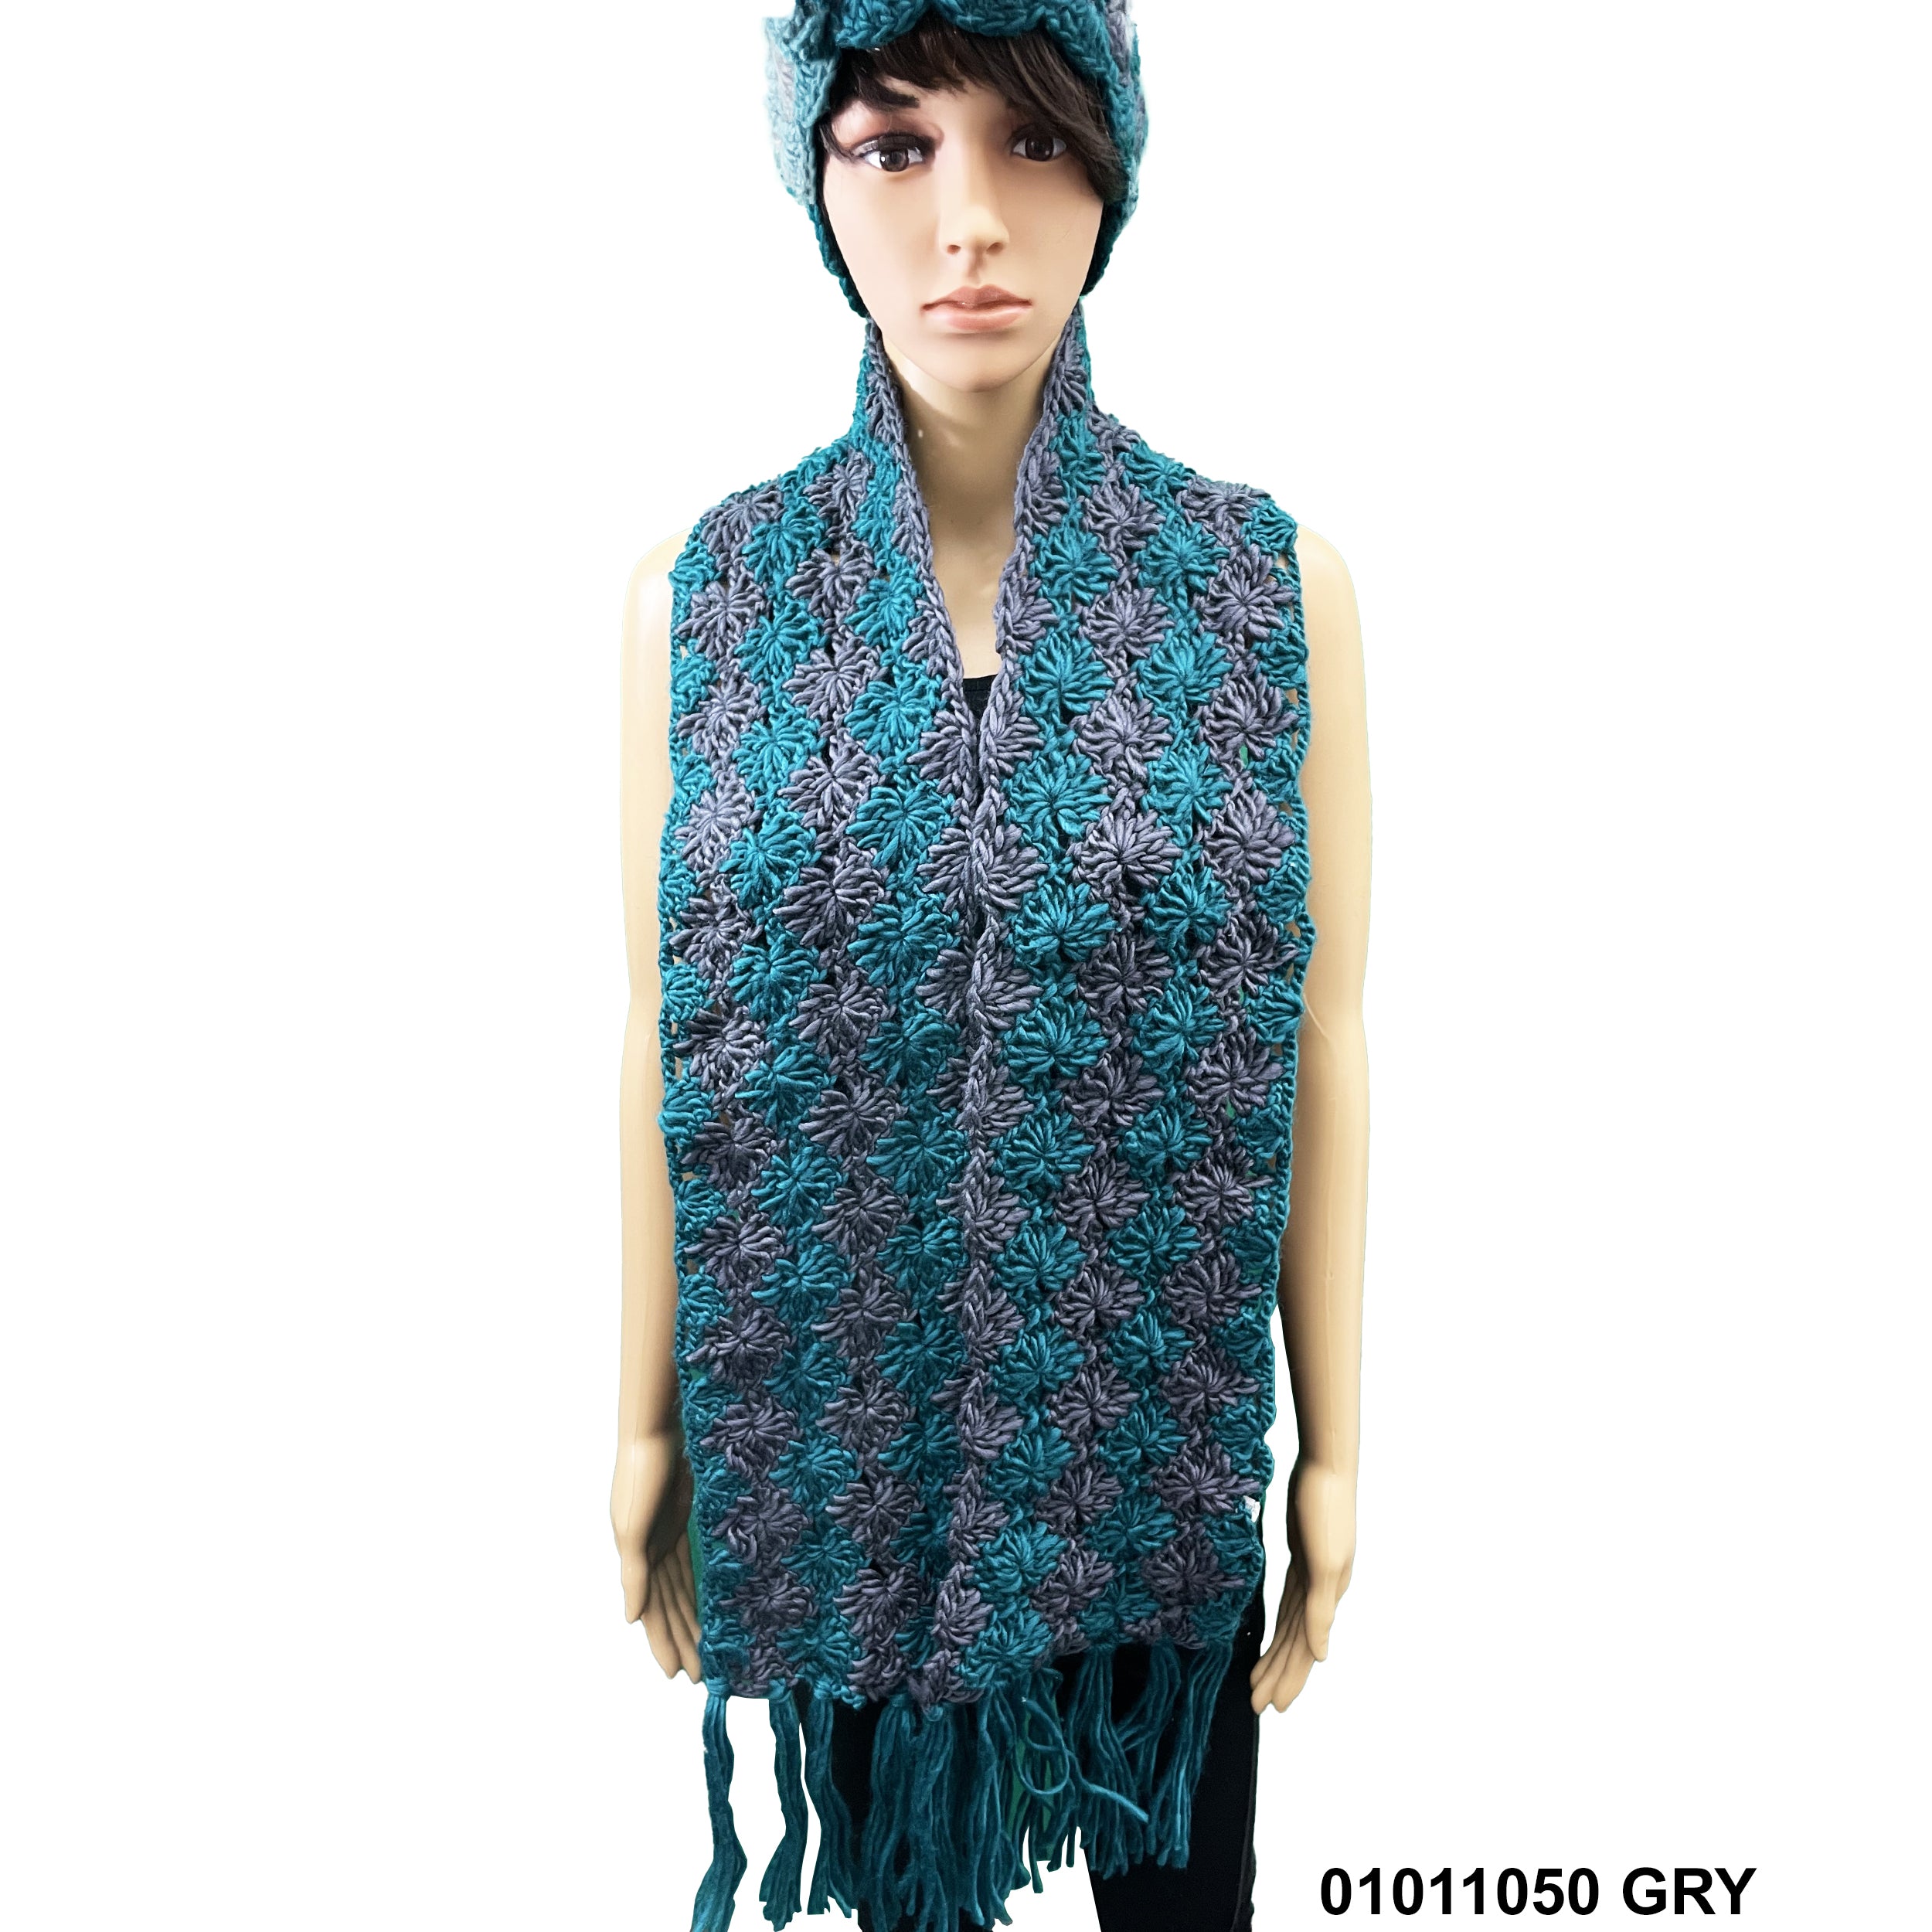 Winter Warm Knitted Beanies And Scarf Set 01011050 GRY